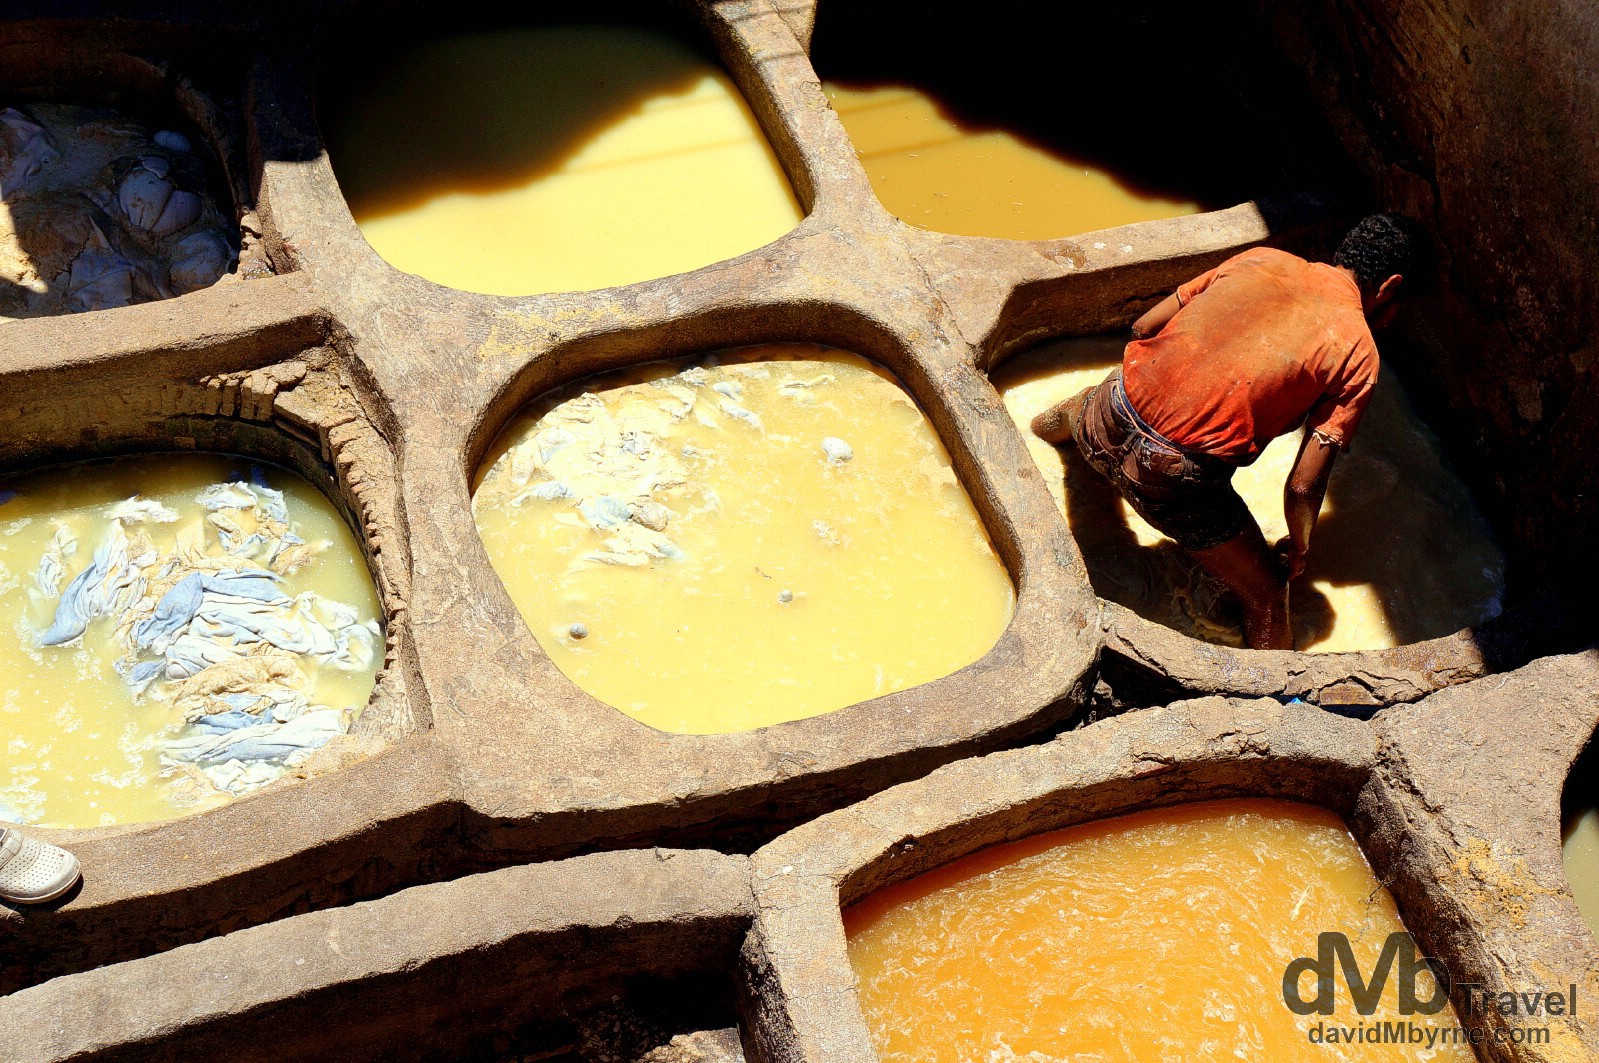 A worker in one of the pits of the Tanneries Chouwara, Fes el Bali, Fes, Morocco. May 29th, 2014. 